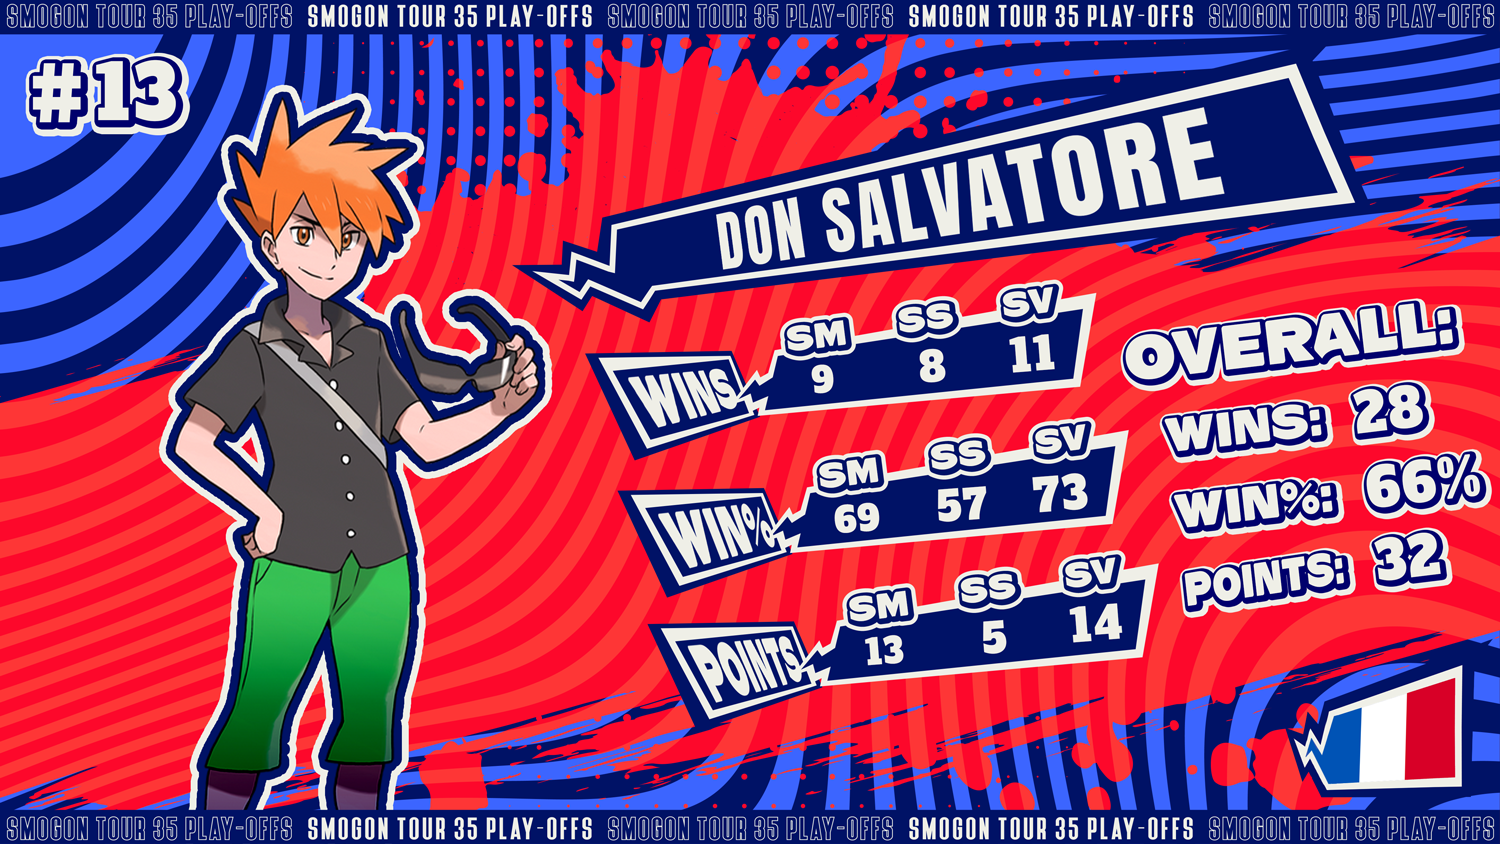 13-Don-Salvatore.png